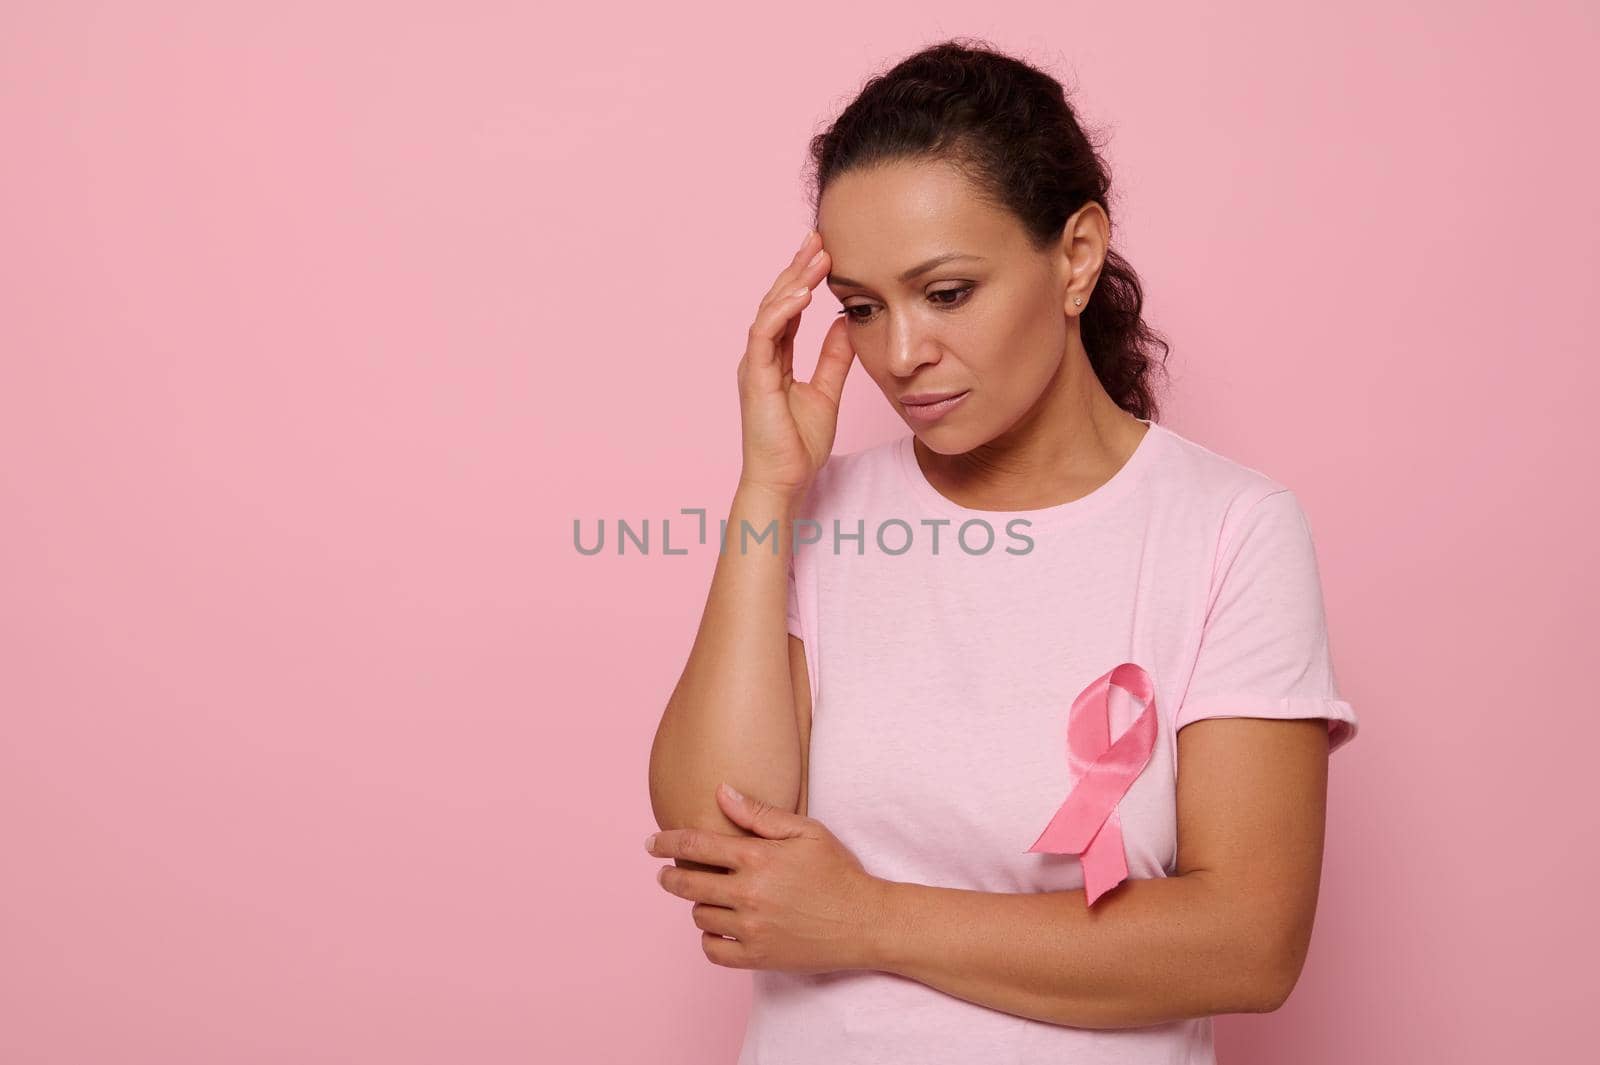 Beautiful thoughtful young woman in pink t-shirt with pink ribbon looking down on pink background, hands on temple. International World Breast Cancer Awareness Day, Educational and medical concept.